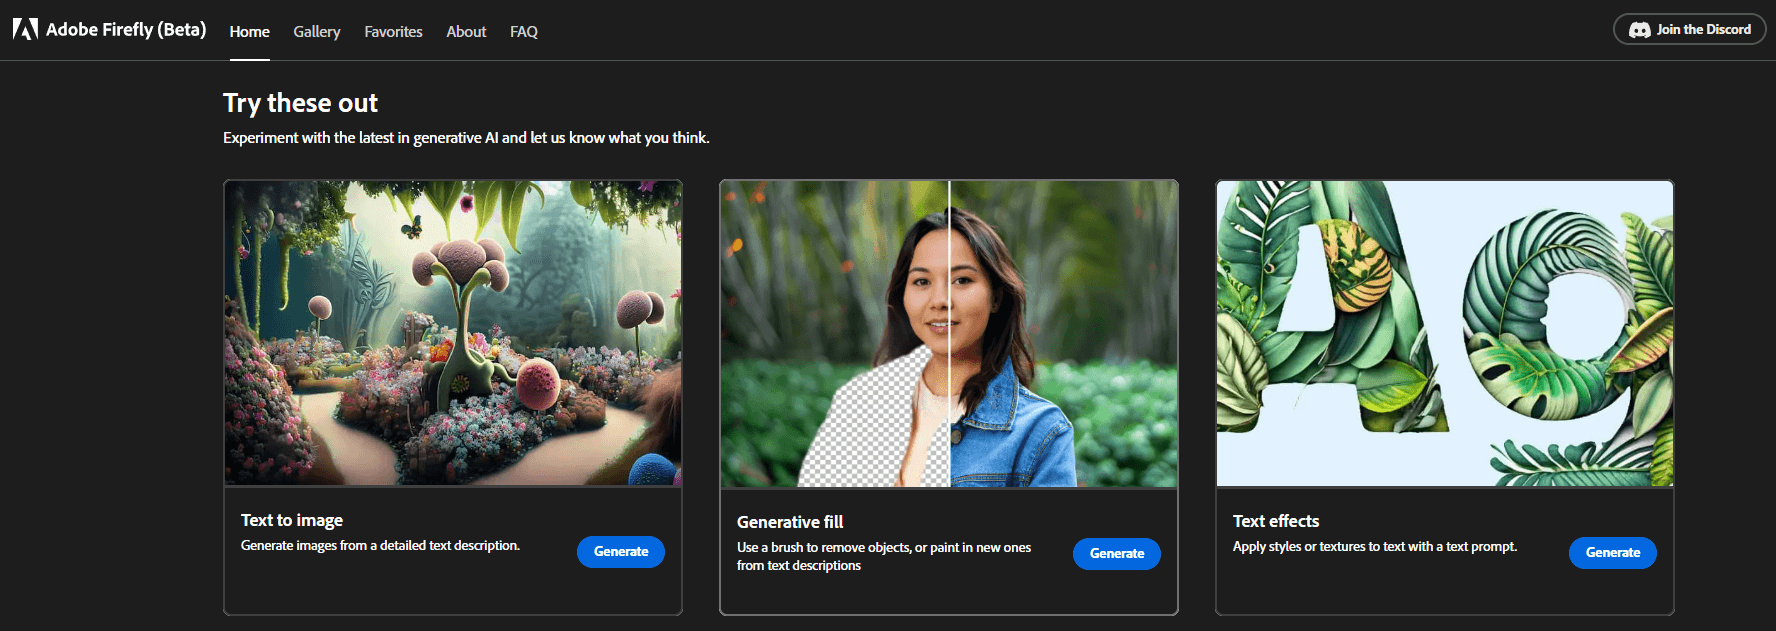 A screenshot of Adobe Firefly’s suite of AI tools